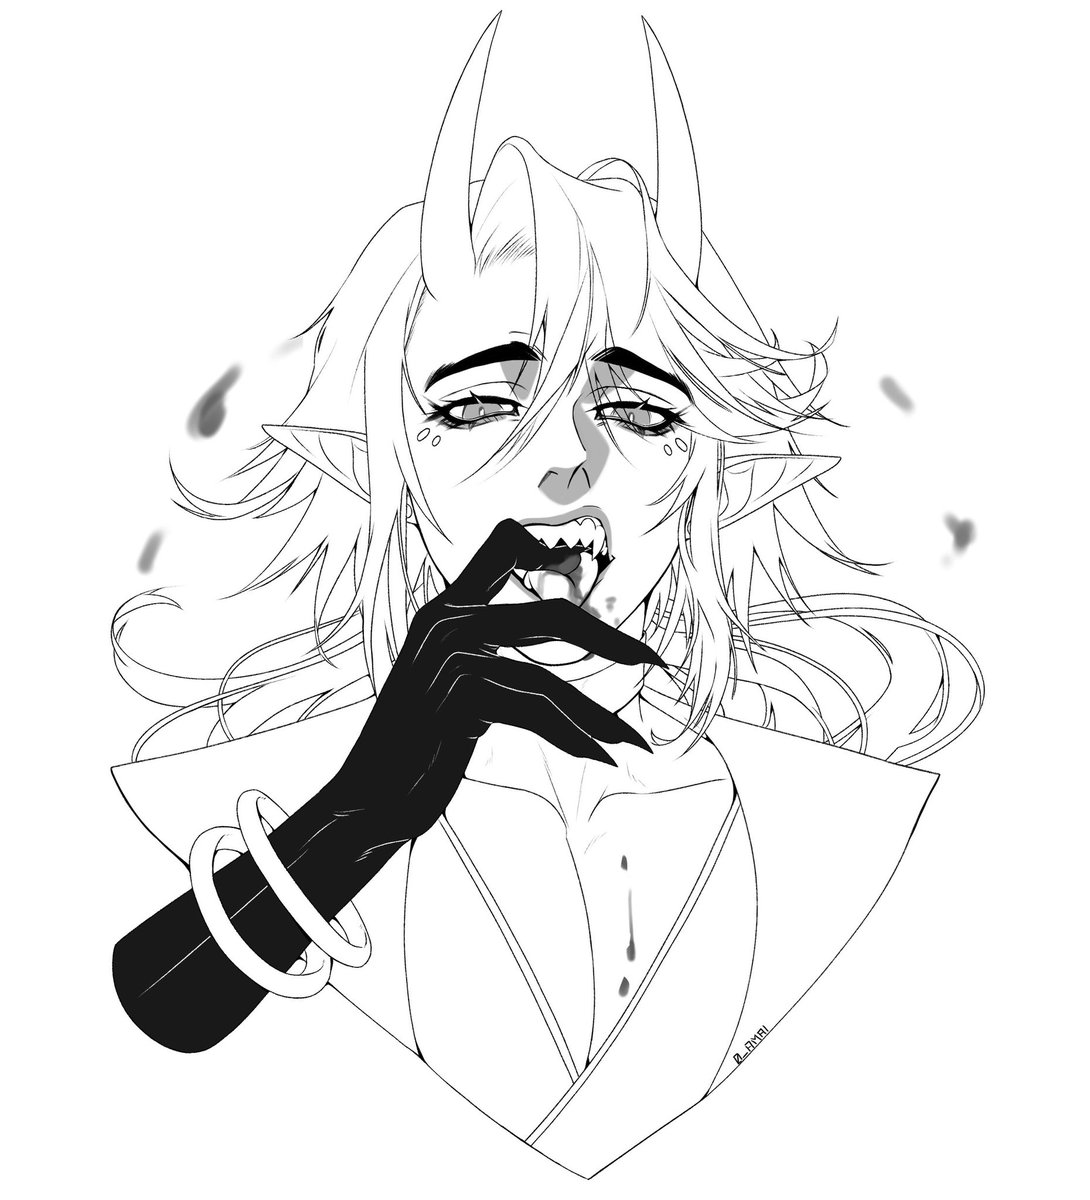 Wow look at that a post after forever LMAO a licky boy commission wip for today

#commission #artcommission #vampireart #csp #cspart #bishie #manhwastyle #manhwaart #fingerlickin #fingerlickinggood